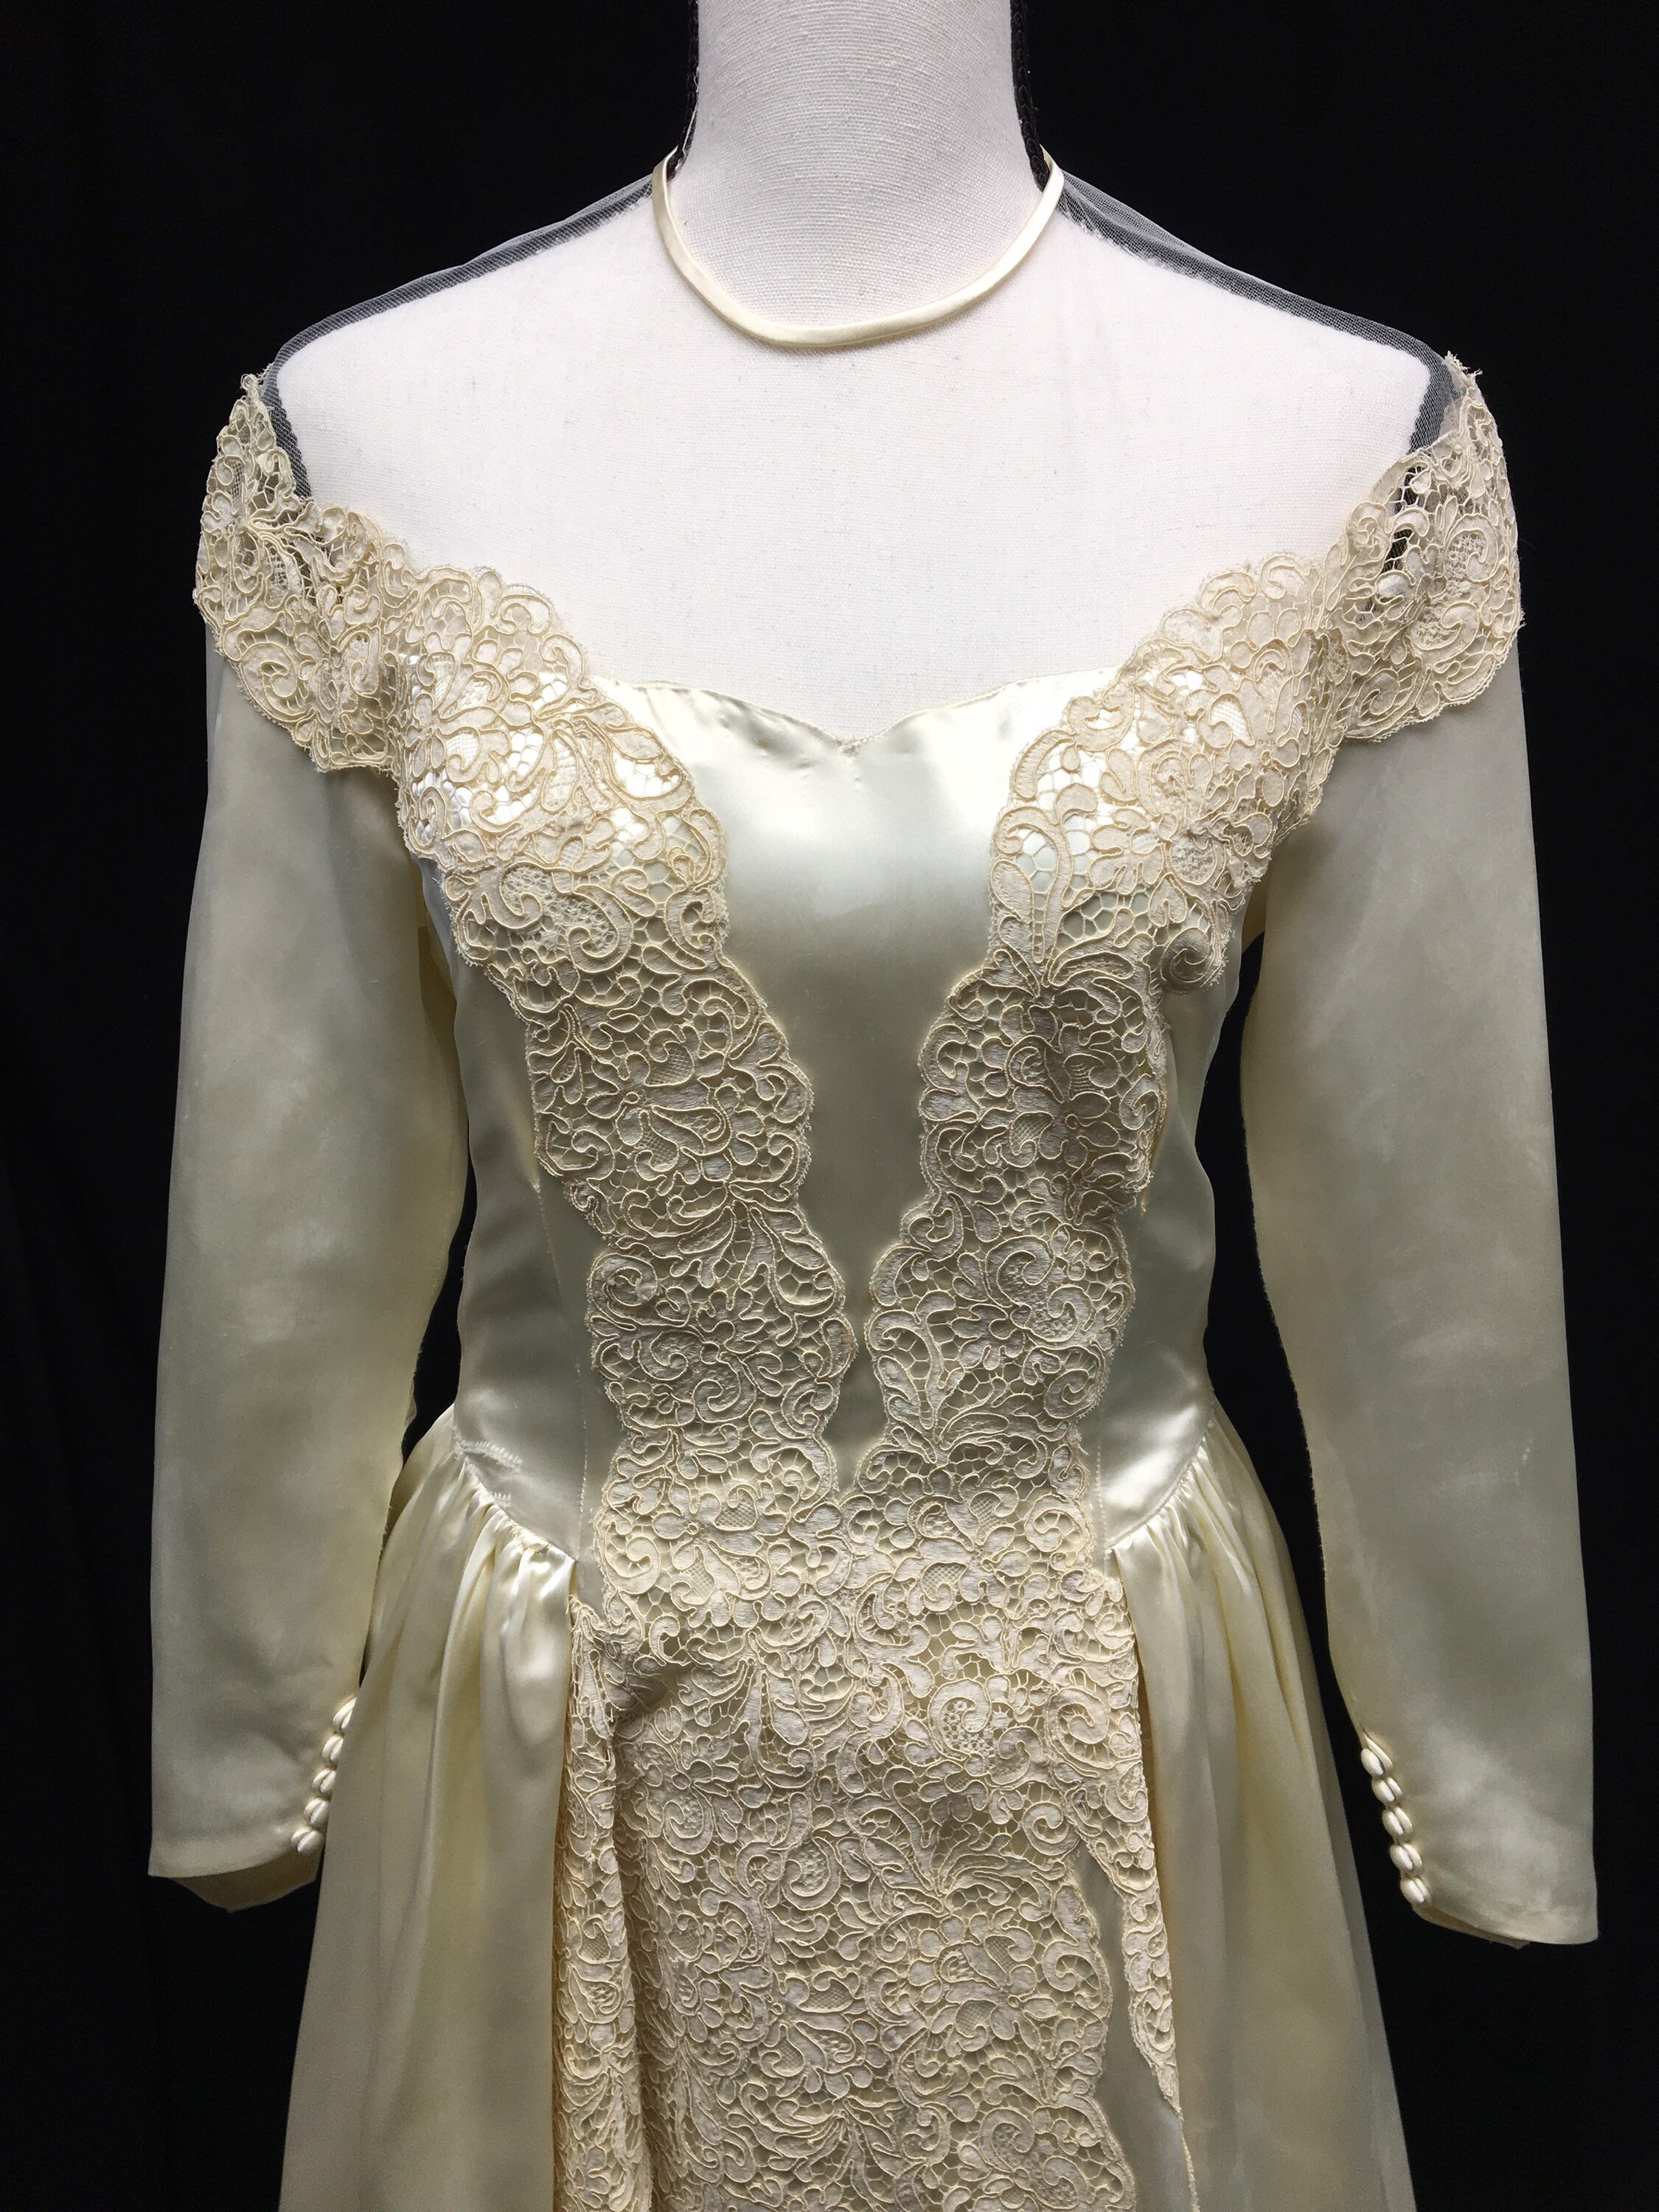 1950s S Ivory Satin Long Sleeve Wedding Gown Alencon Lace - Etsy